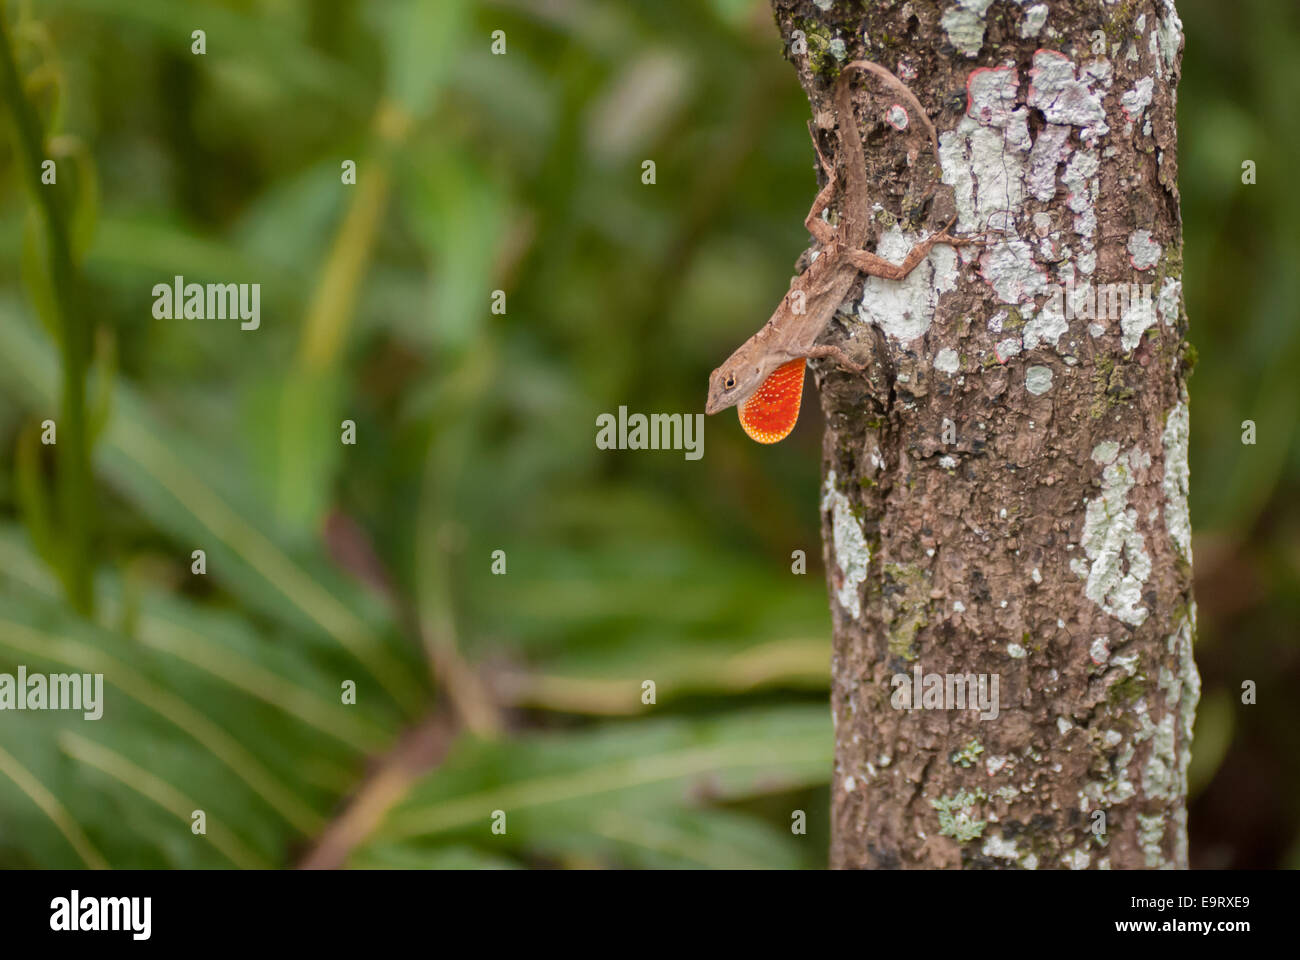 A Brown Anole Lizard clings to a tree trunk exposing its orange neck flap. Stock Photo